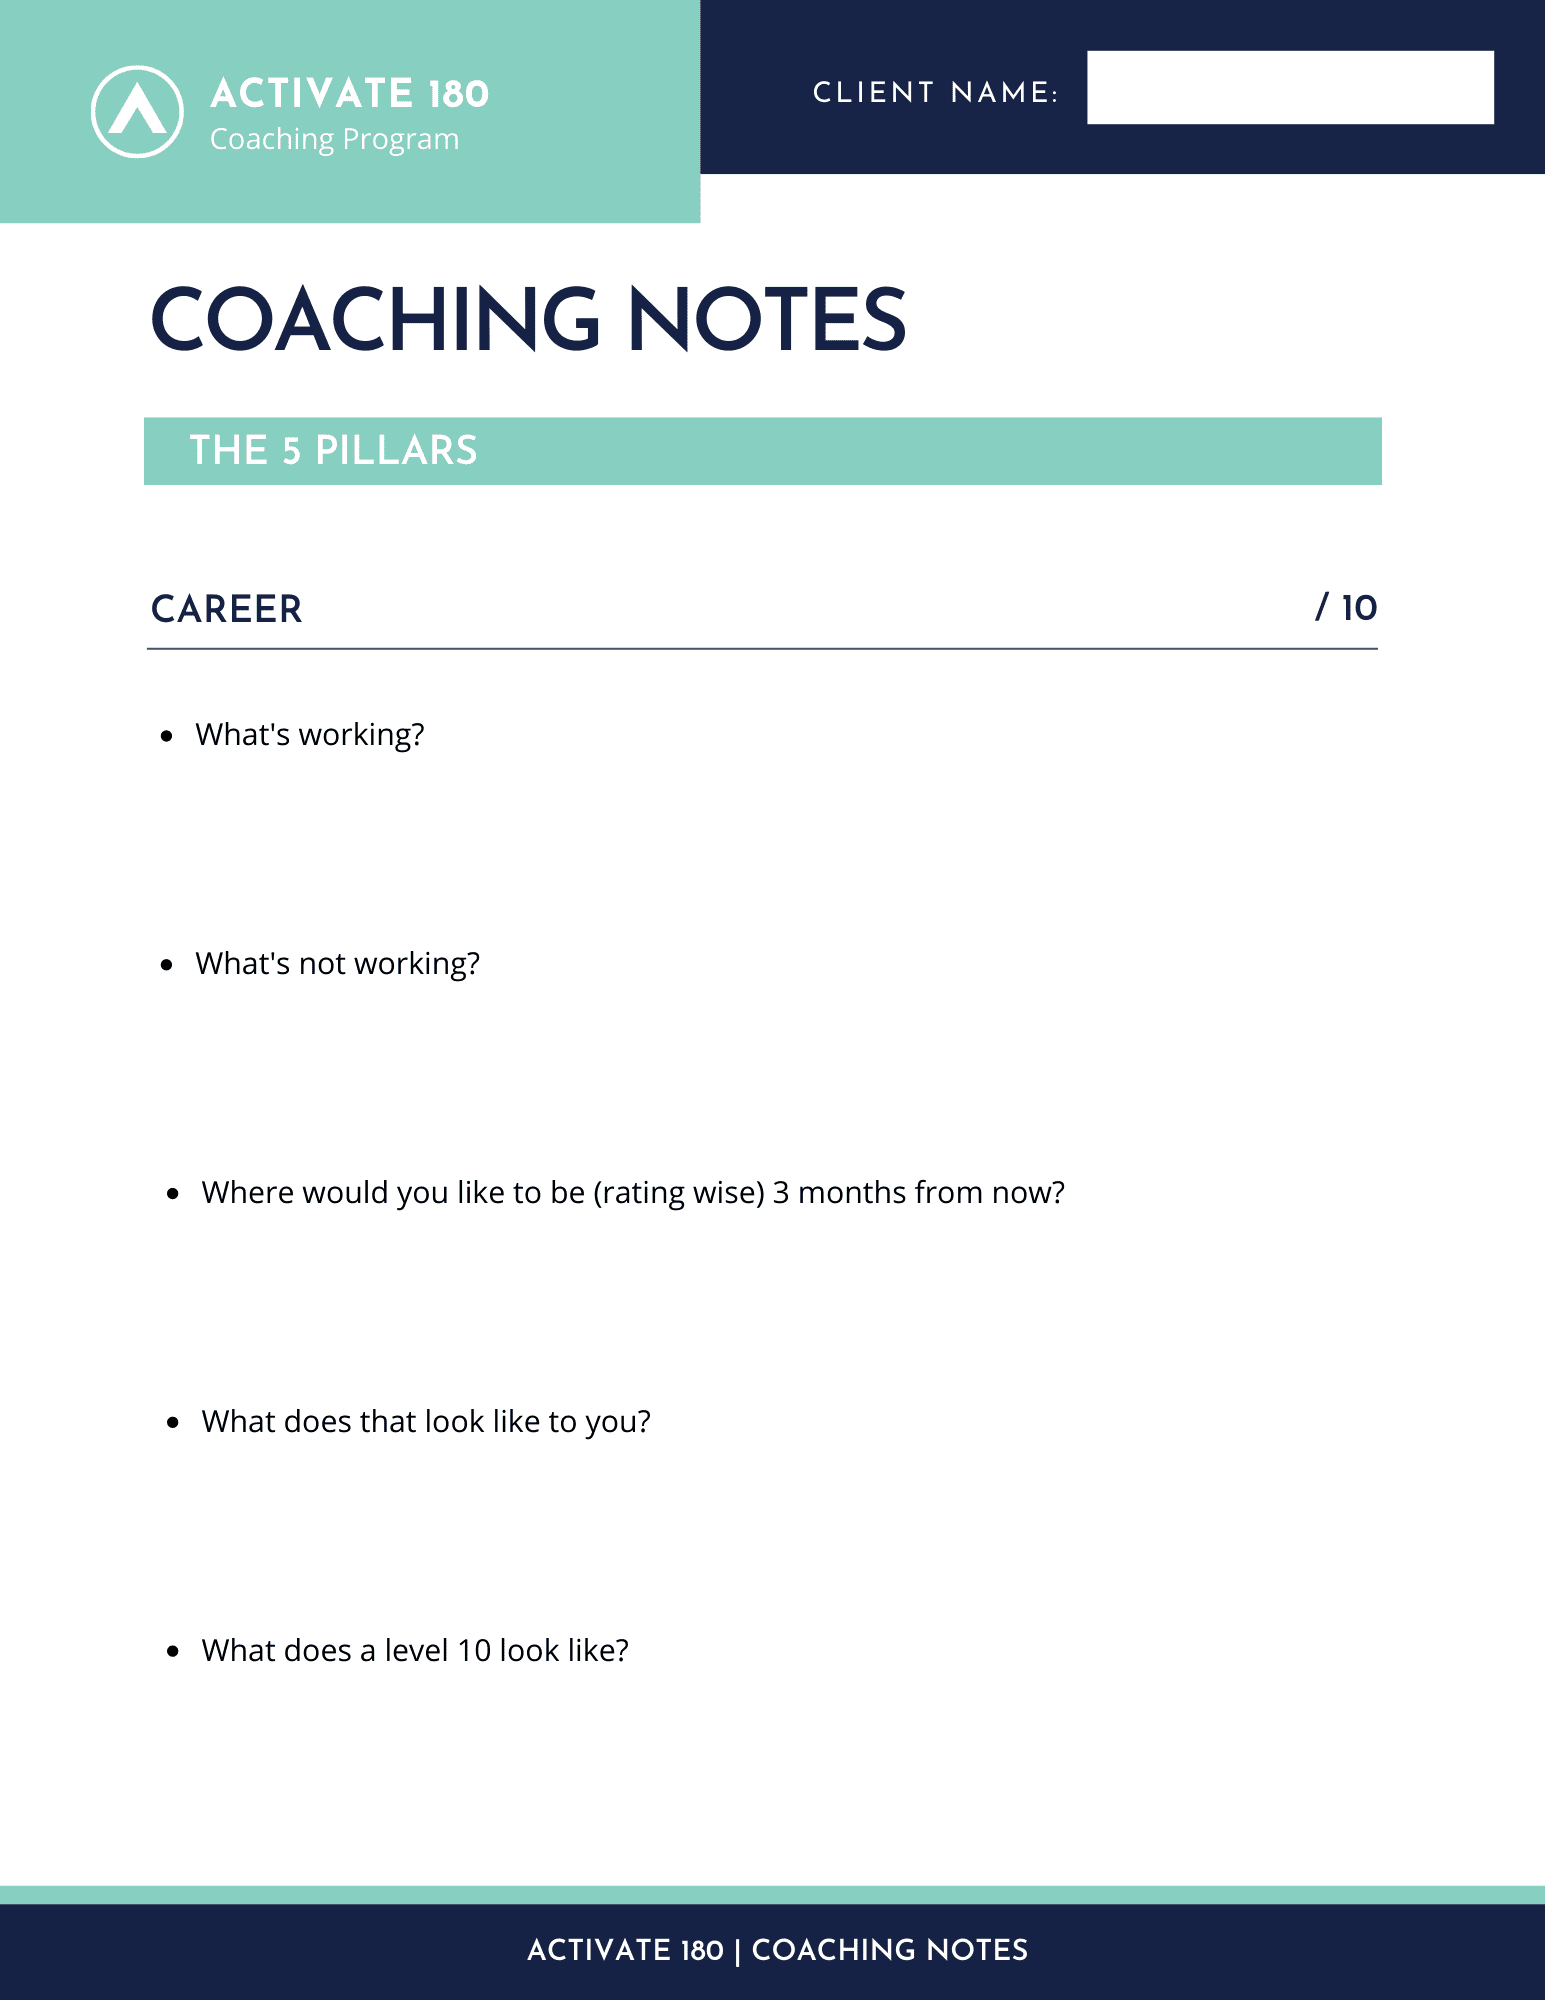 A180 Coaching Notes Template